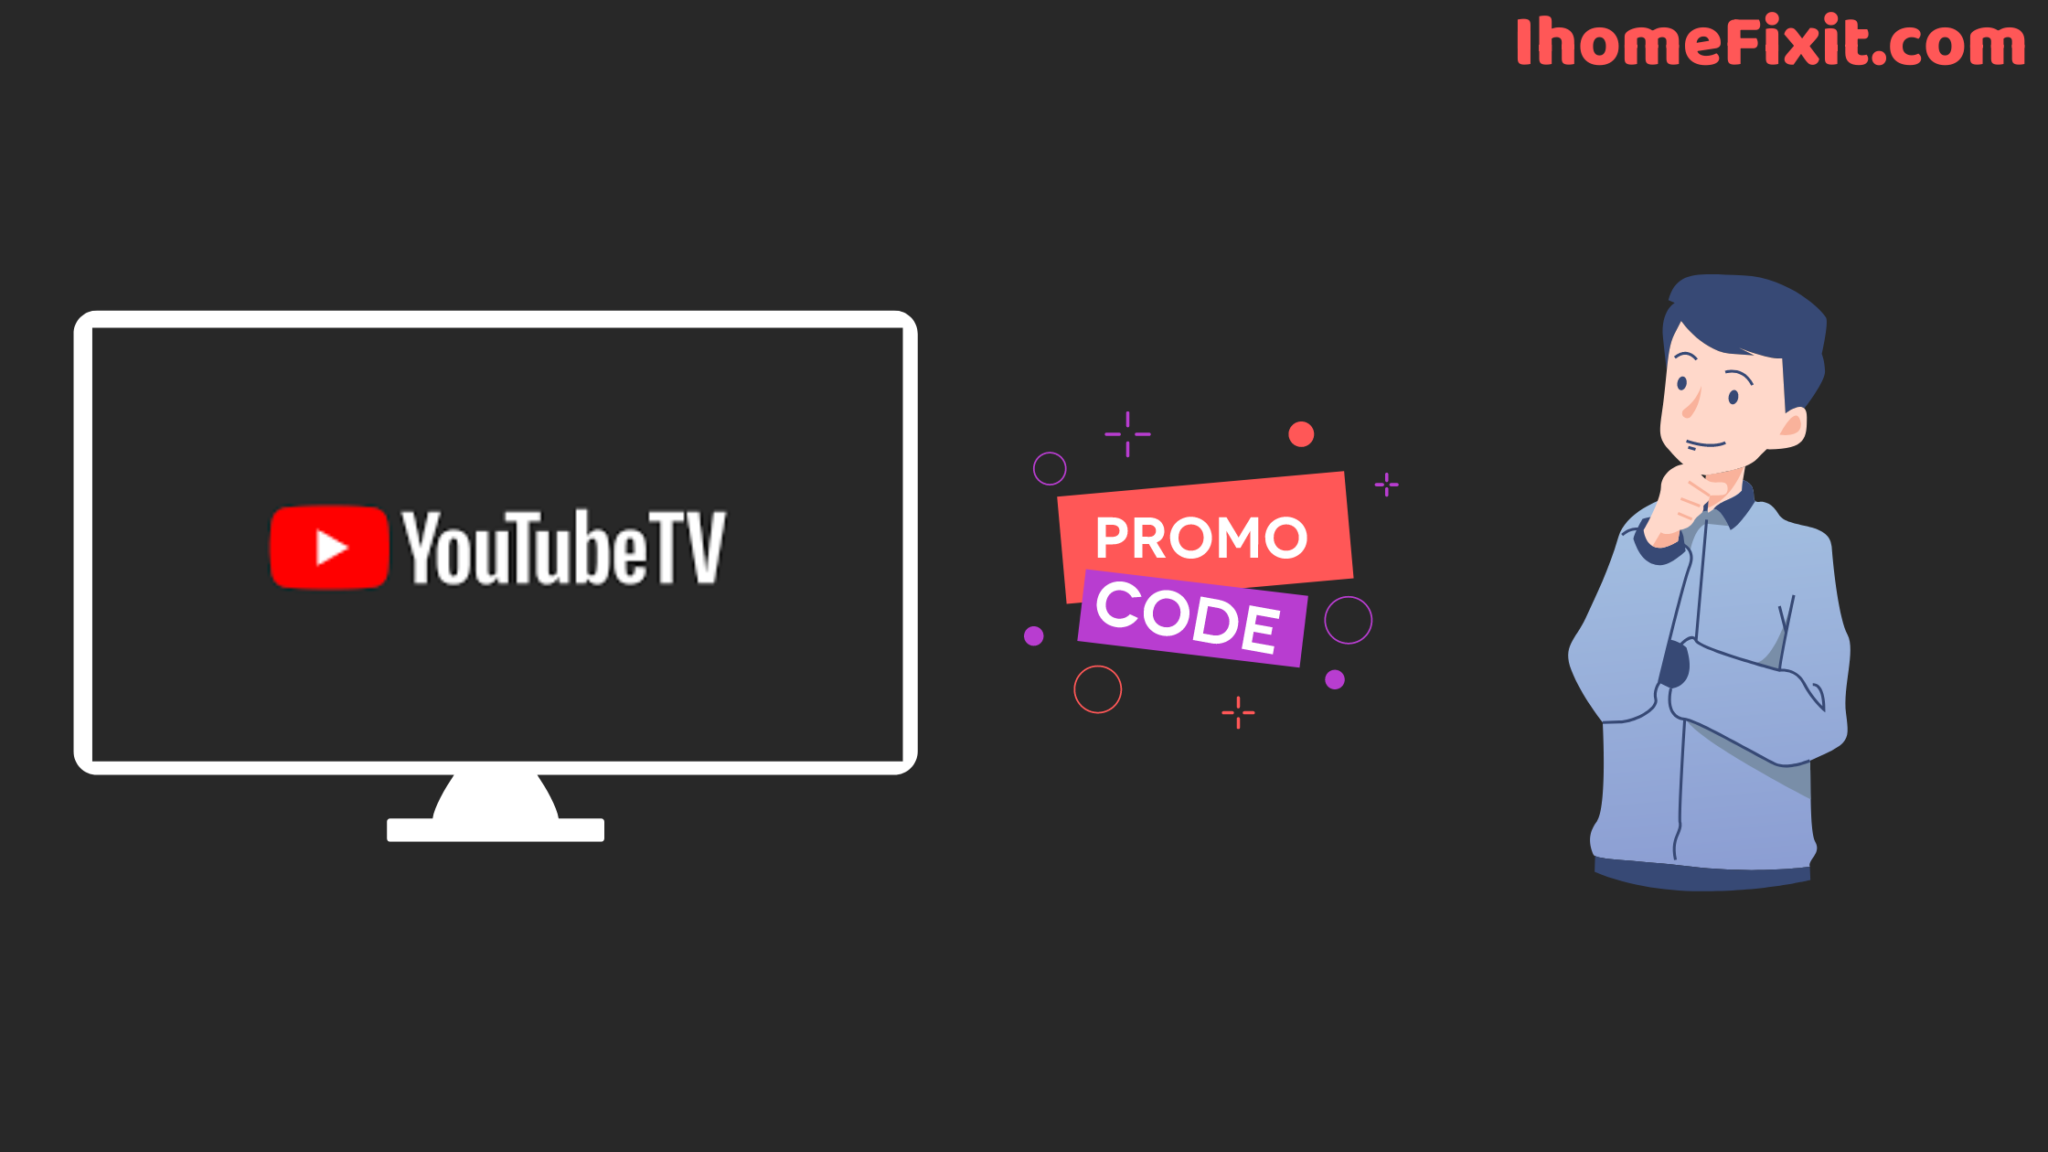 YouTube TV Promo Codes That Actually Work [99% Success]